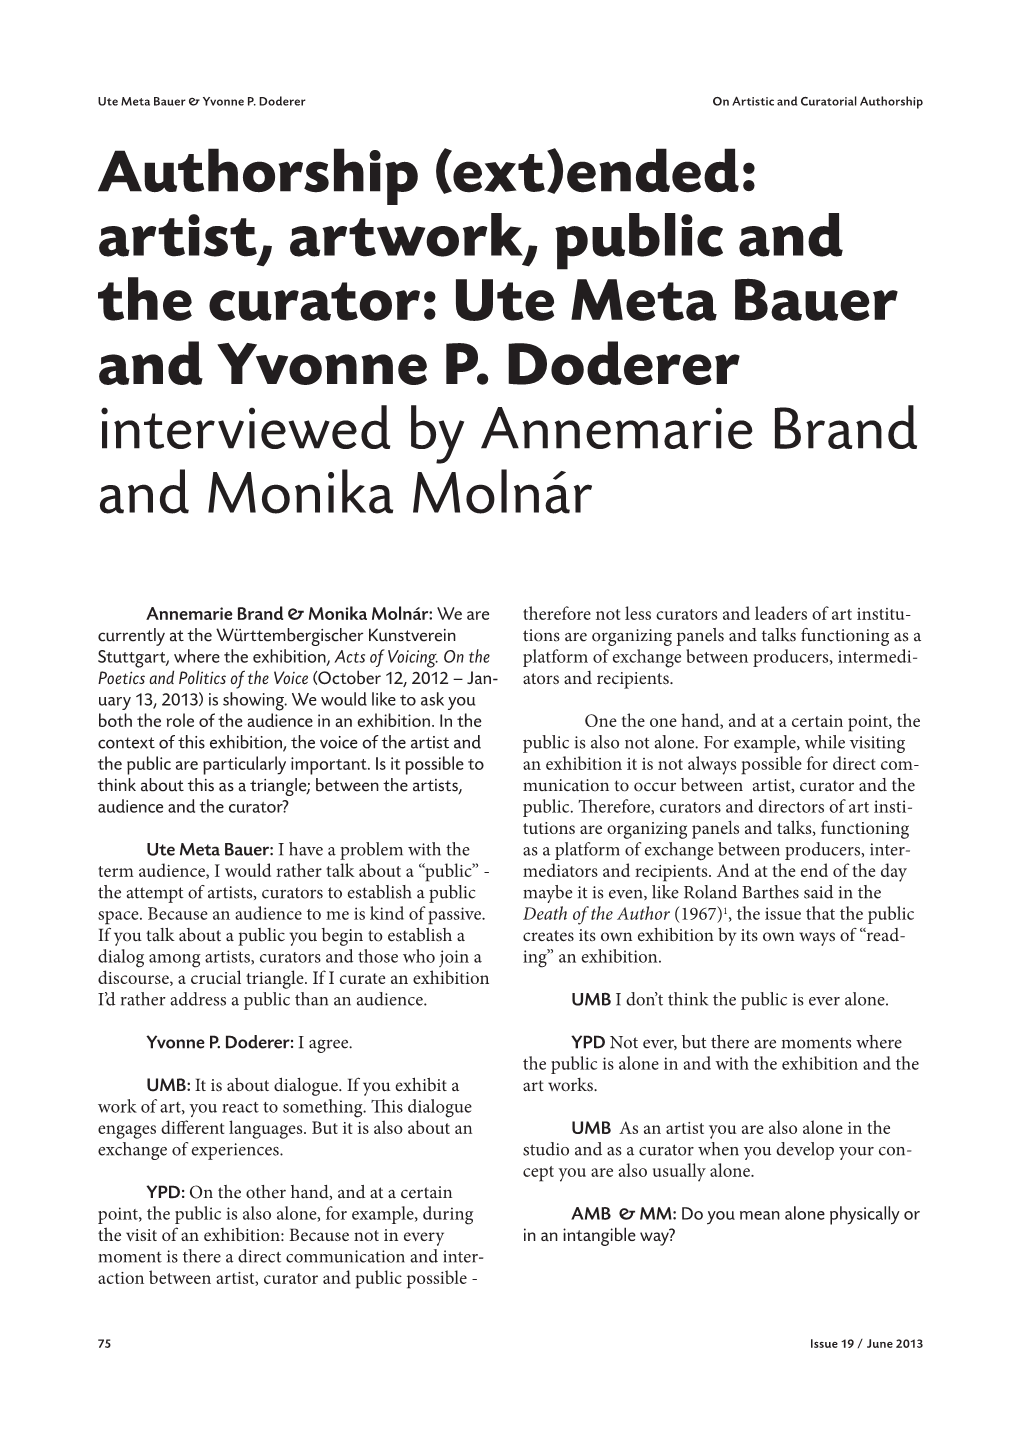 Authorship (Ext)Ended: Artist, Artwork, Public and the Curator: Ute Meta Bauer and Yvonne P